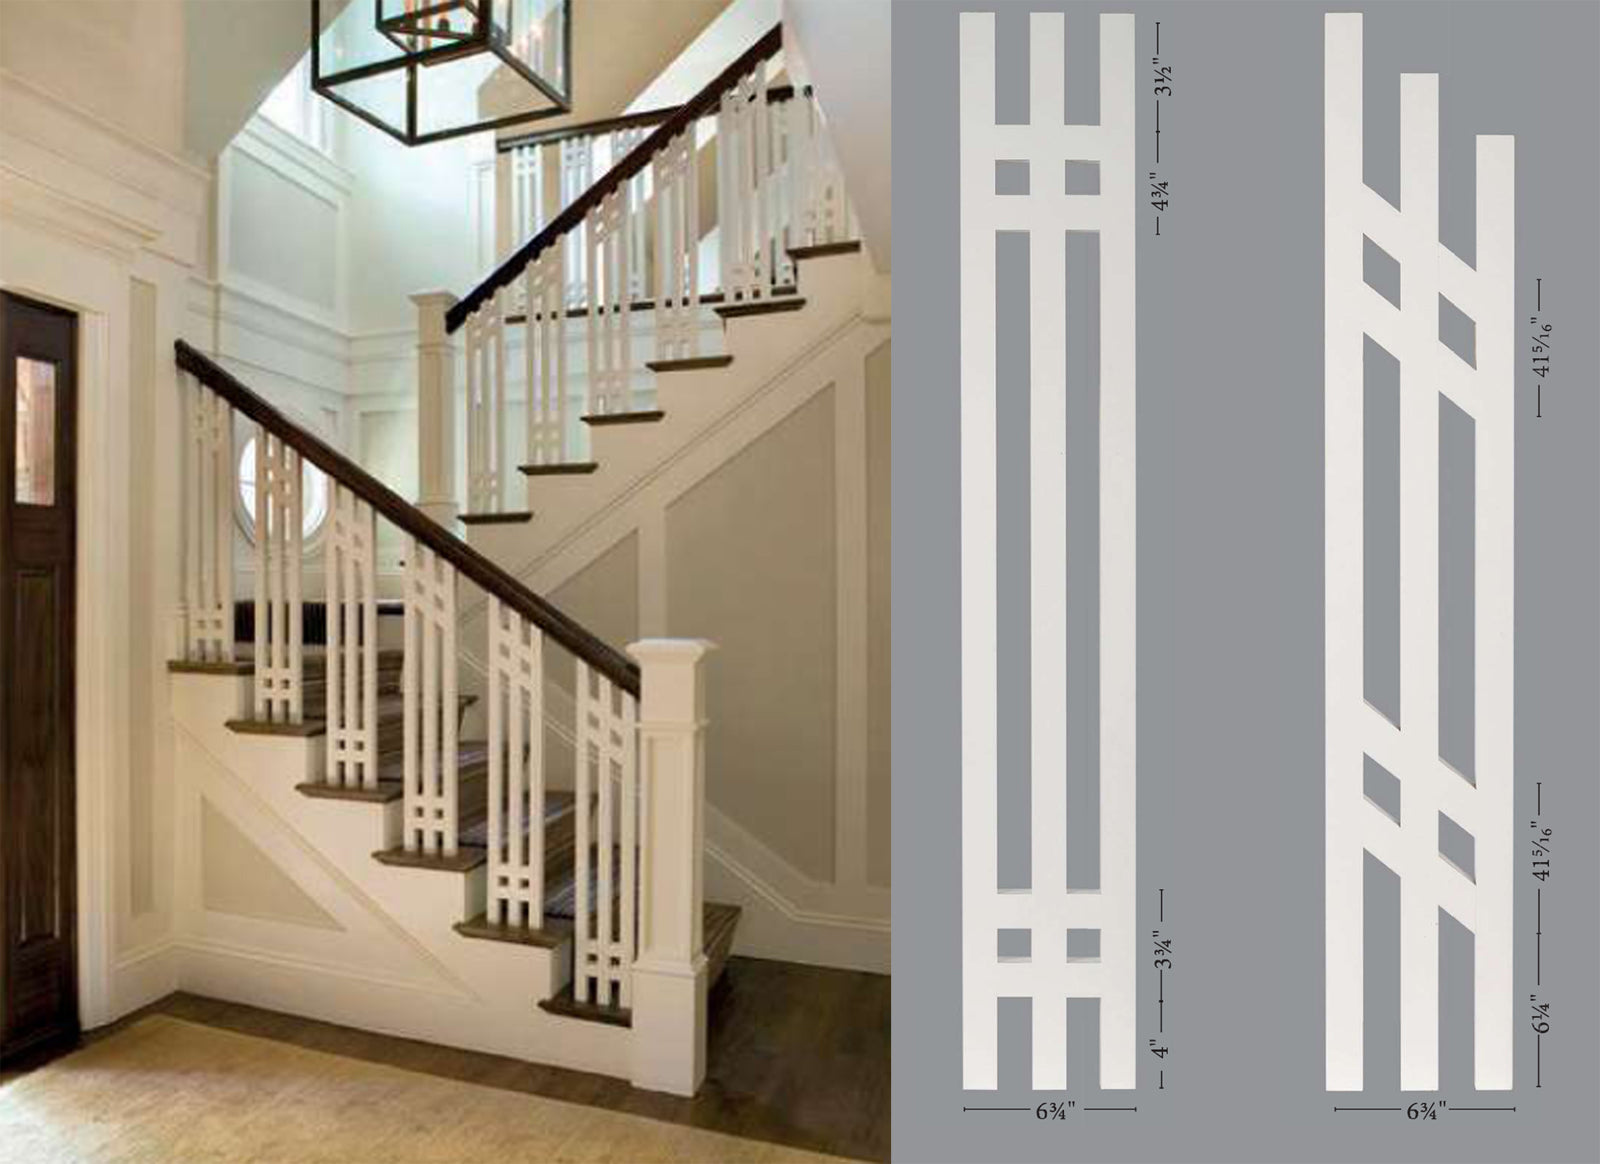 Harborside Mission Prairie Baluster Panels and Staircase